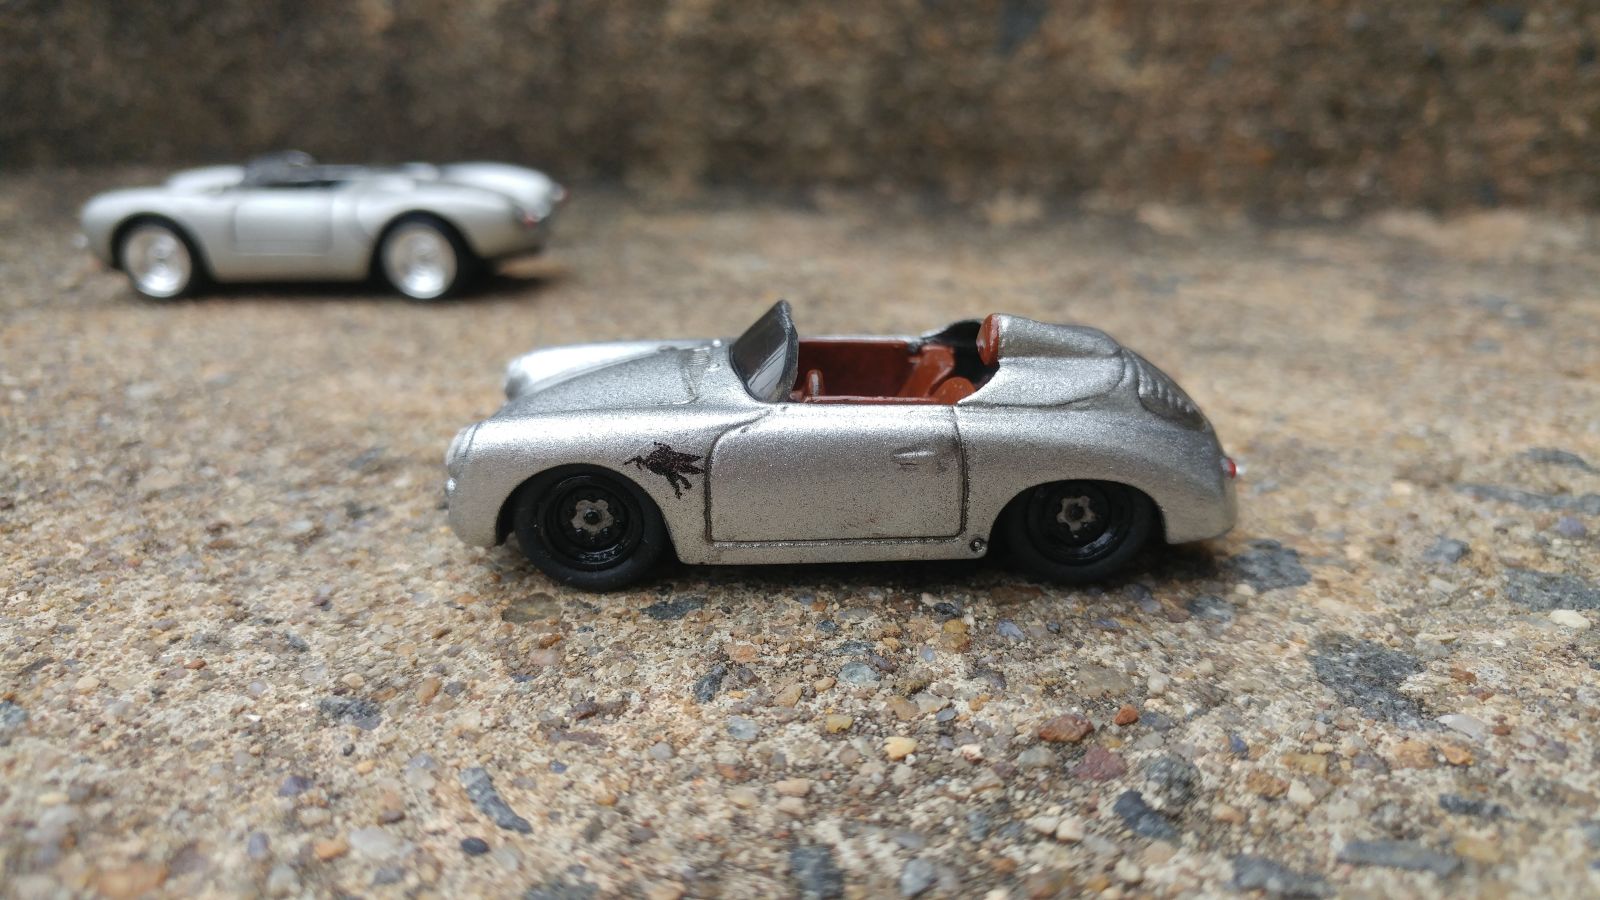 Illustration for article titled Teutonic Friday? Impatient Small Silver Speedster